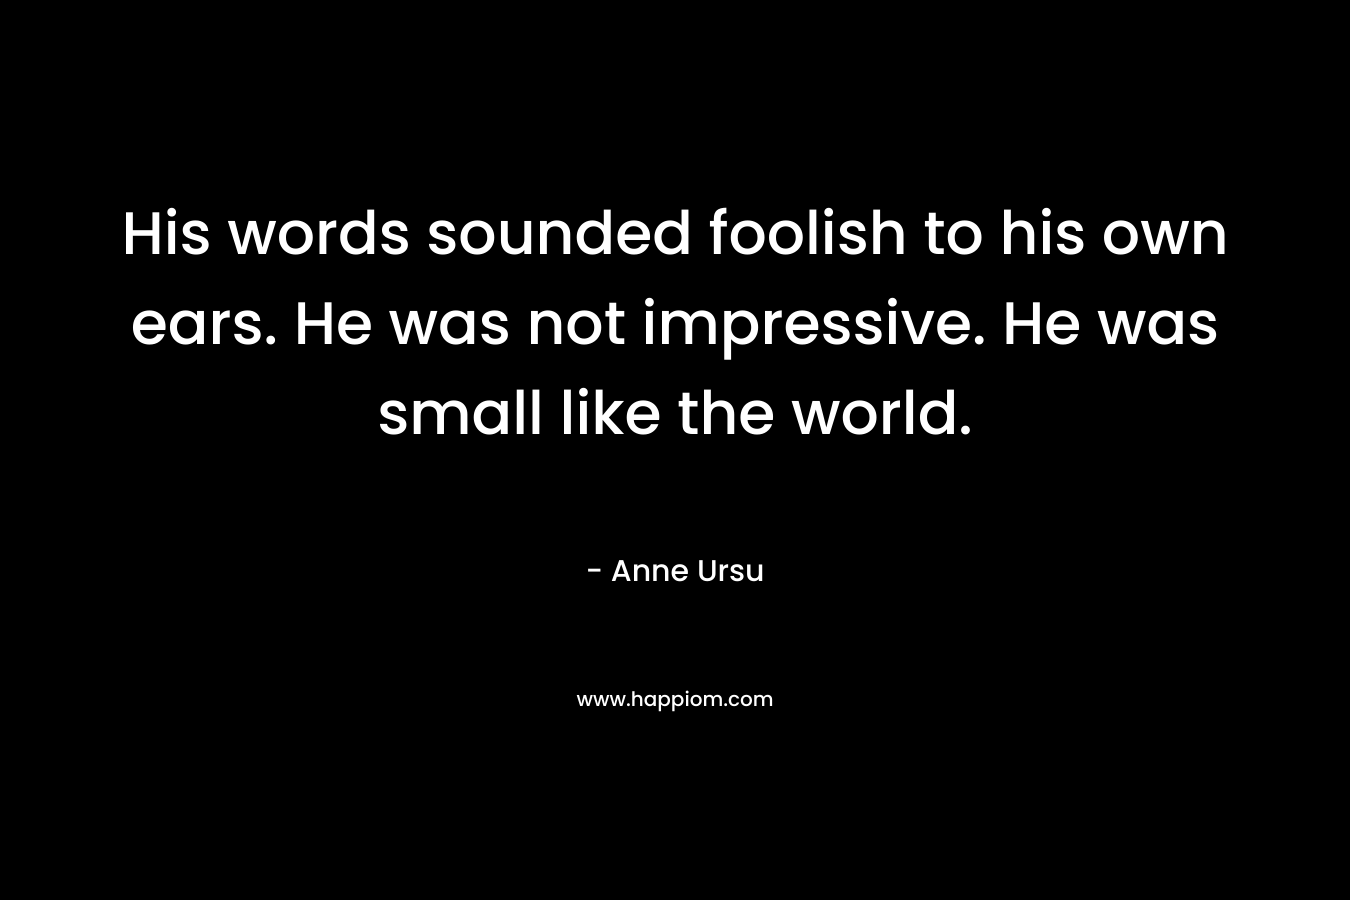 His words sounded foolish to his own ears. He was not impressive. He was small like the world. – Anne Ursu